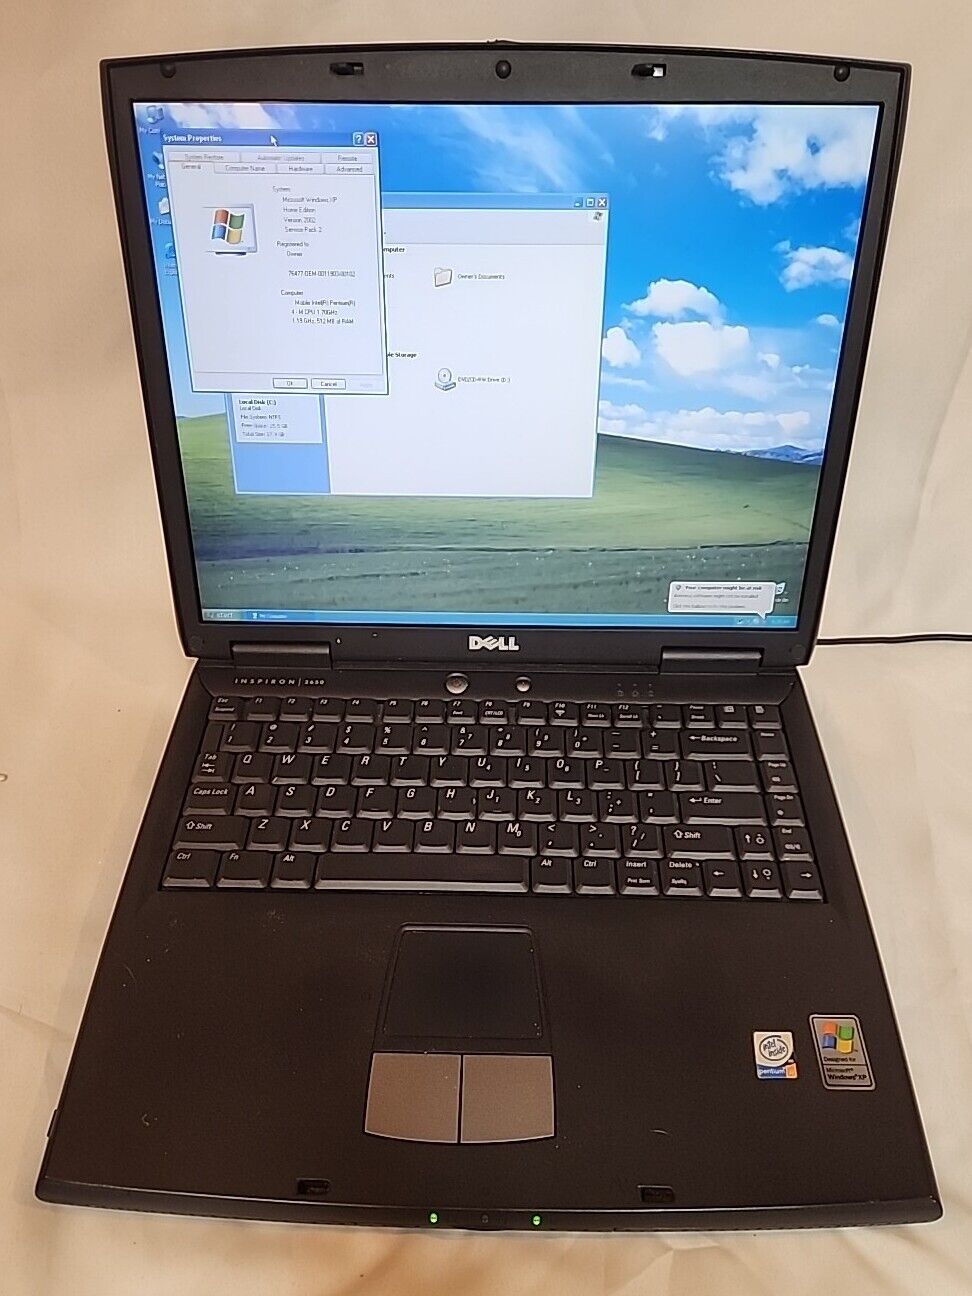 Vintage Dell Inspiron 2650 Intel Pentium Fully Working 2002 Model 1.7GHz 512MB